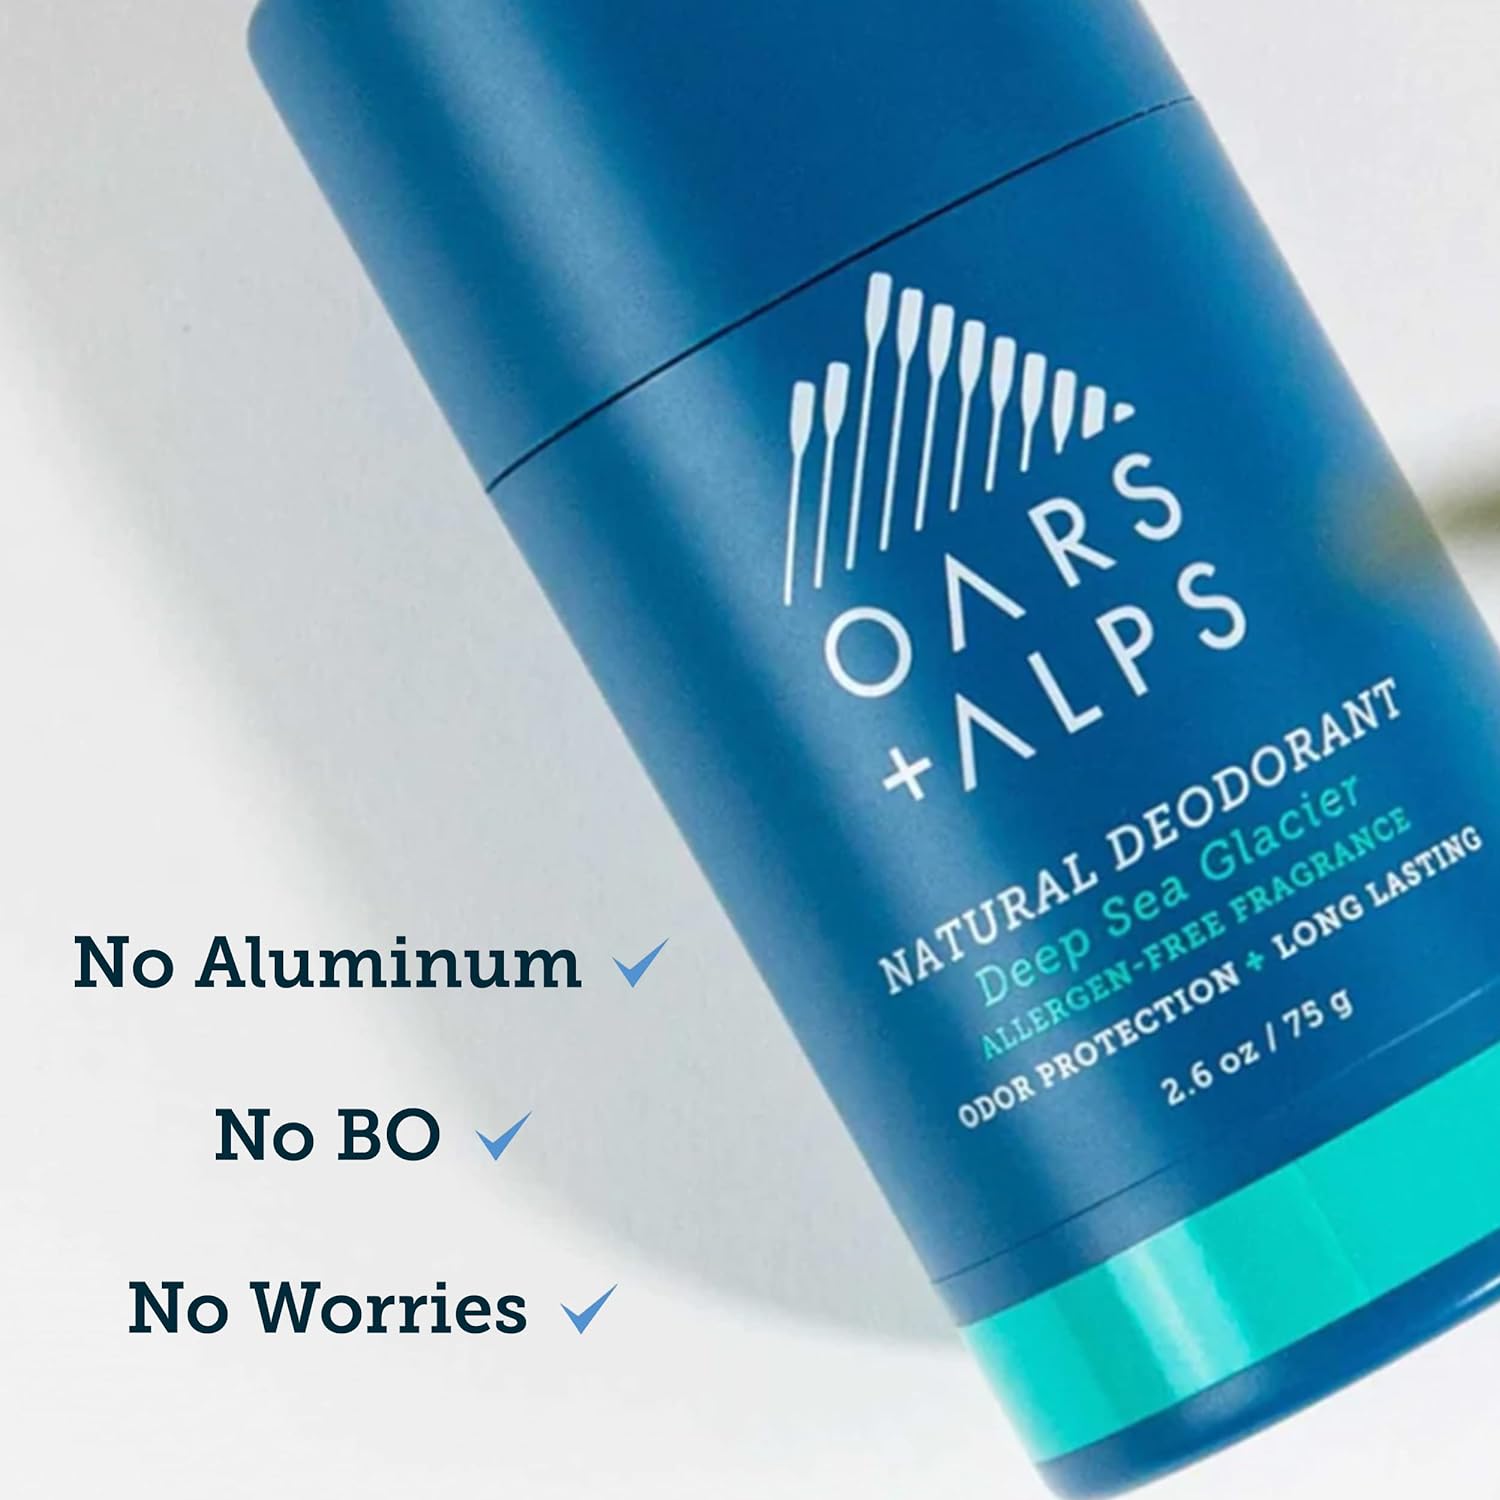 Oars + Alps Aluminum Free Deodorant for Men and Women, Dermatologist Tested, Travel Size, Deep Sea Glacier, 2 Pack, 2.6 Oz Each : Beauty & Personal Care